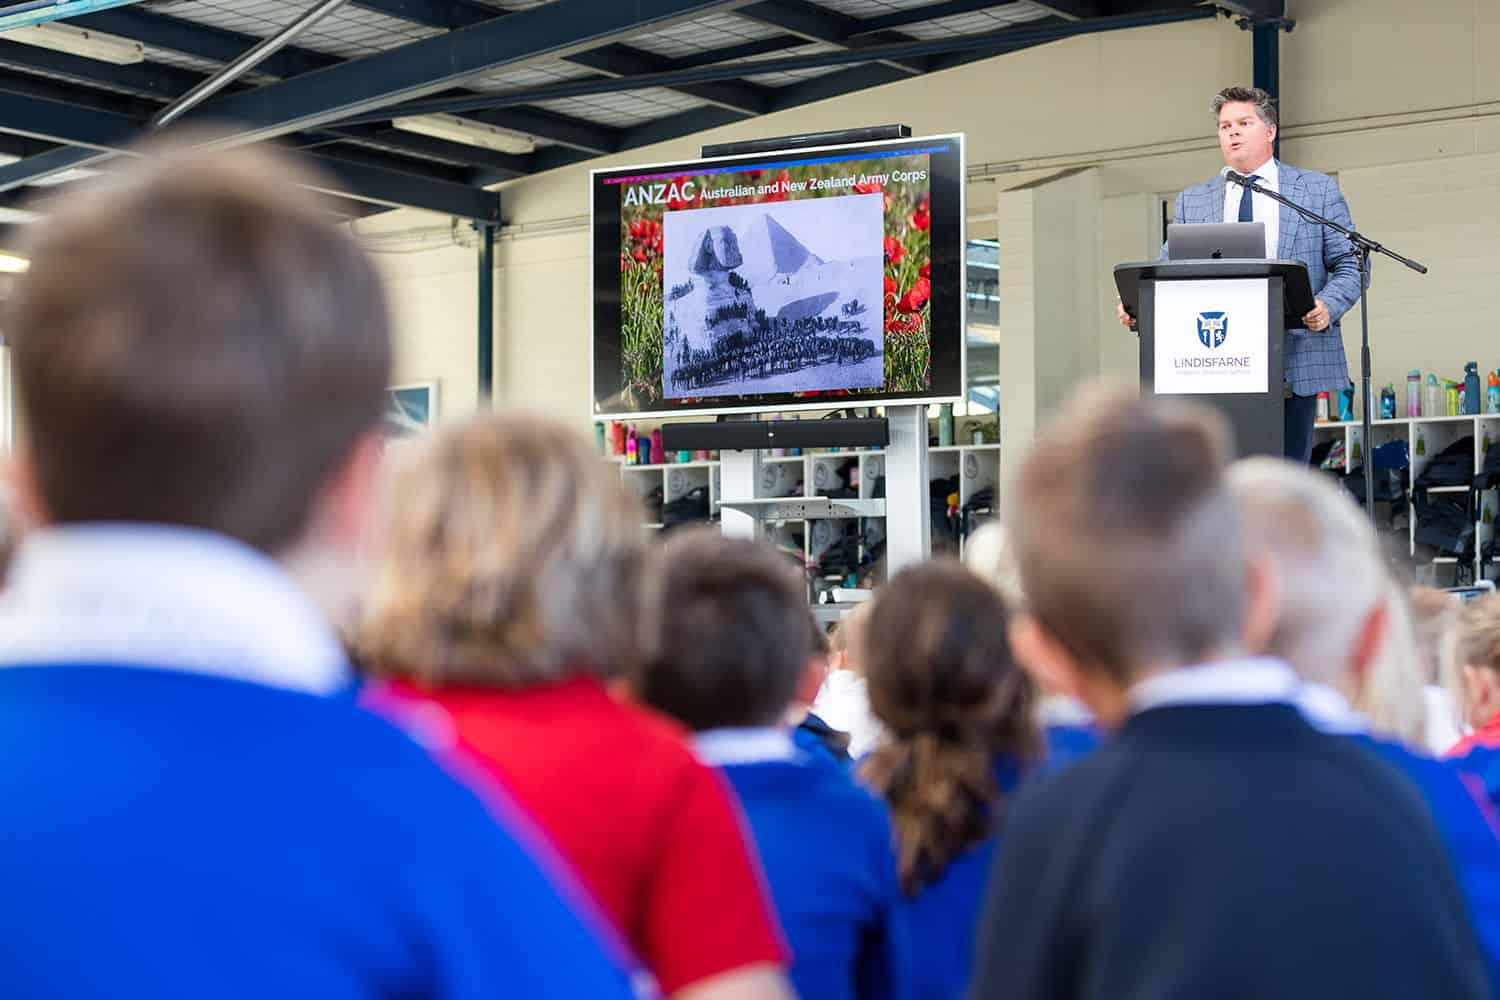 Junior School principal Mark Douglas speaks to the students about the importance of ANZAC Day